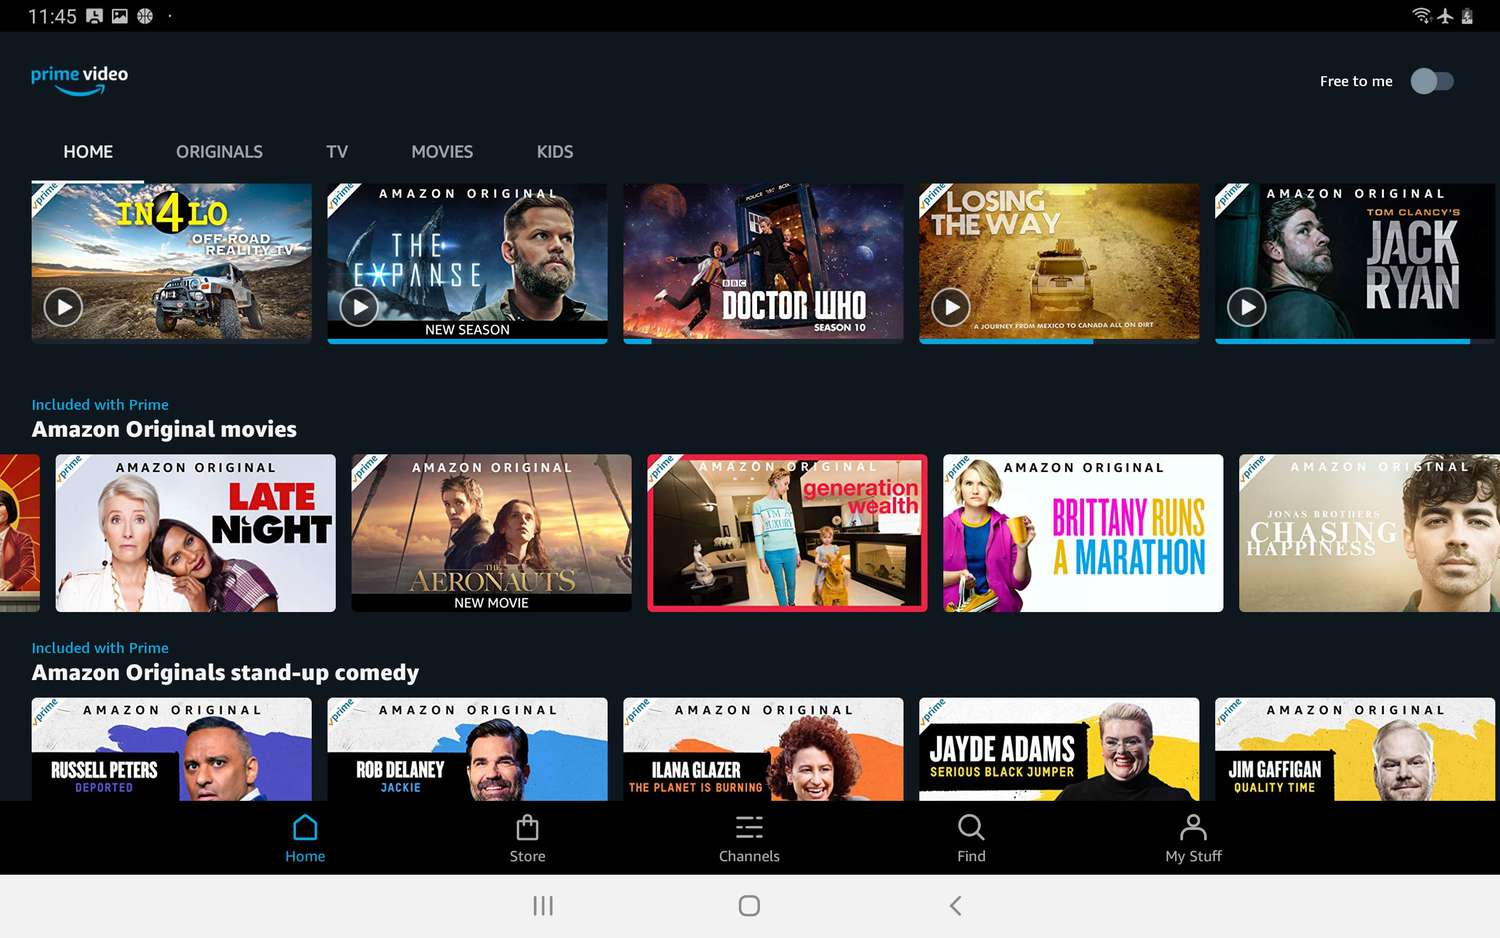 How To Watch Amazon Prime Videos On Android